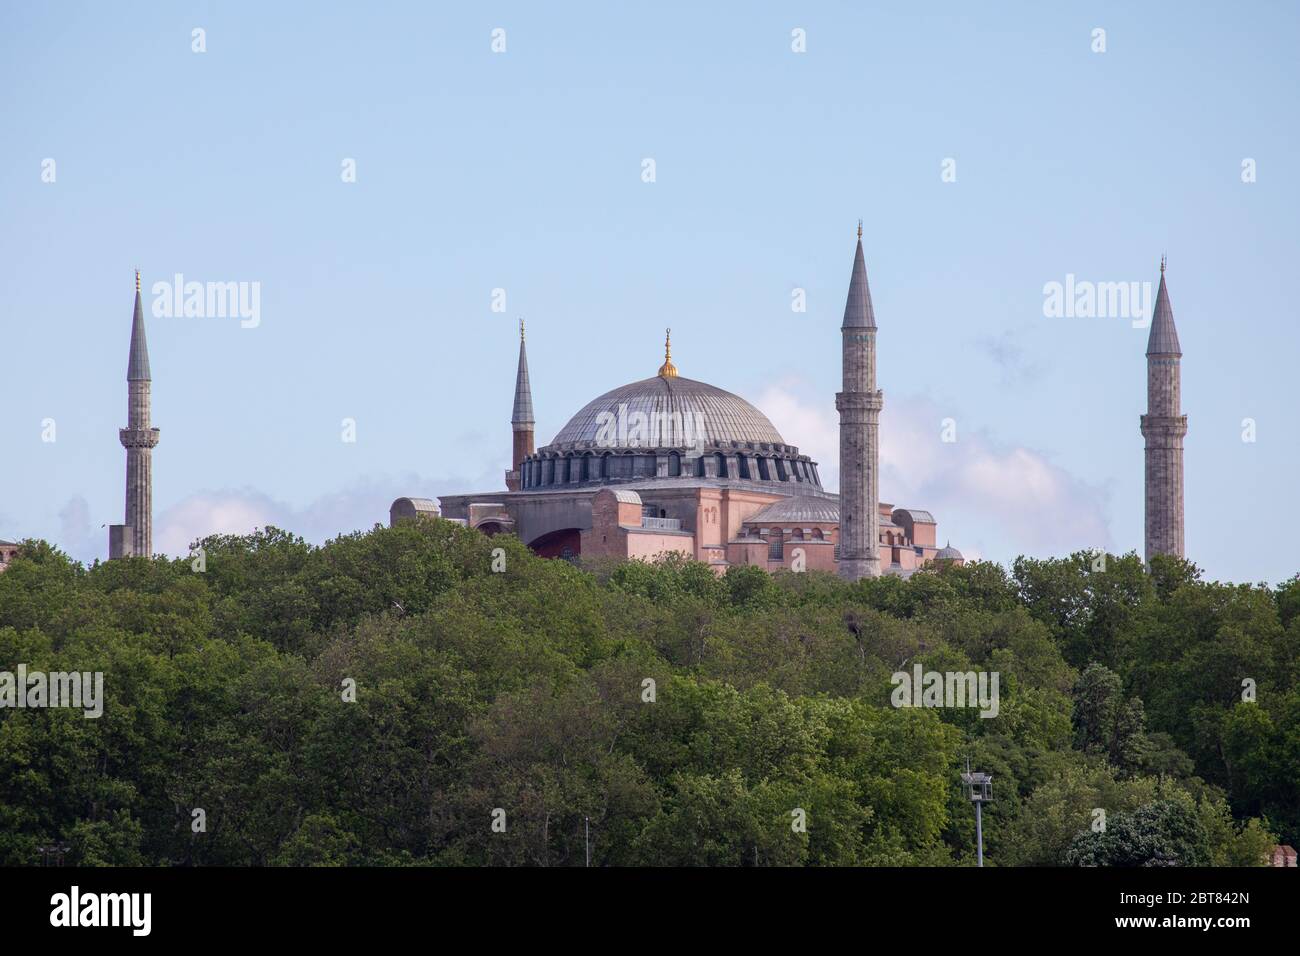 View of the domes and minarets of the Hagia Sophia Museum, located on the historical peninsula of Istanbul. Stock Photo